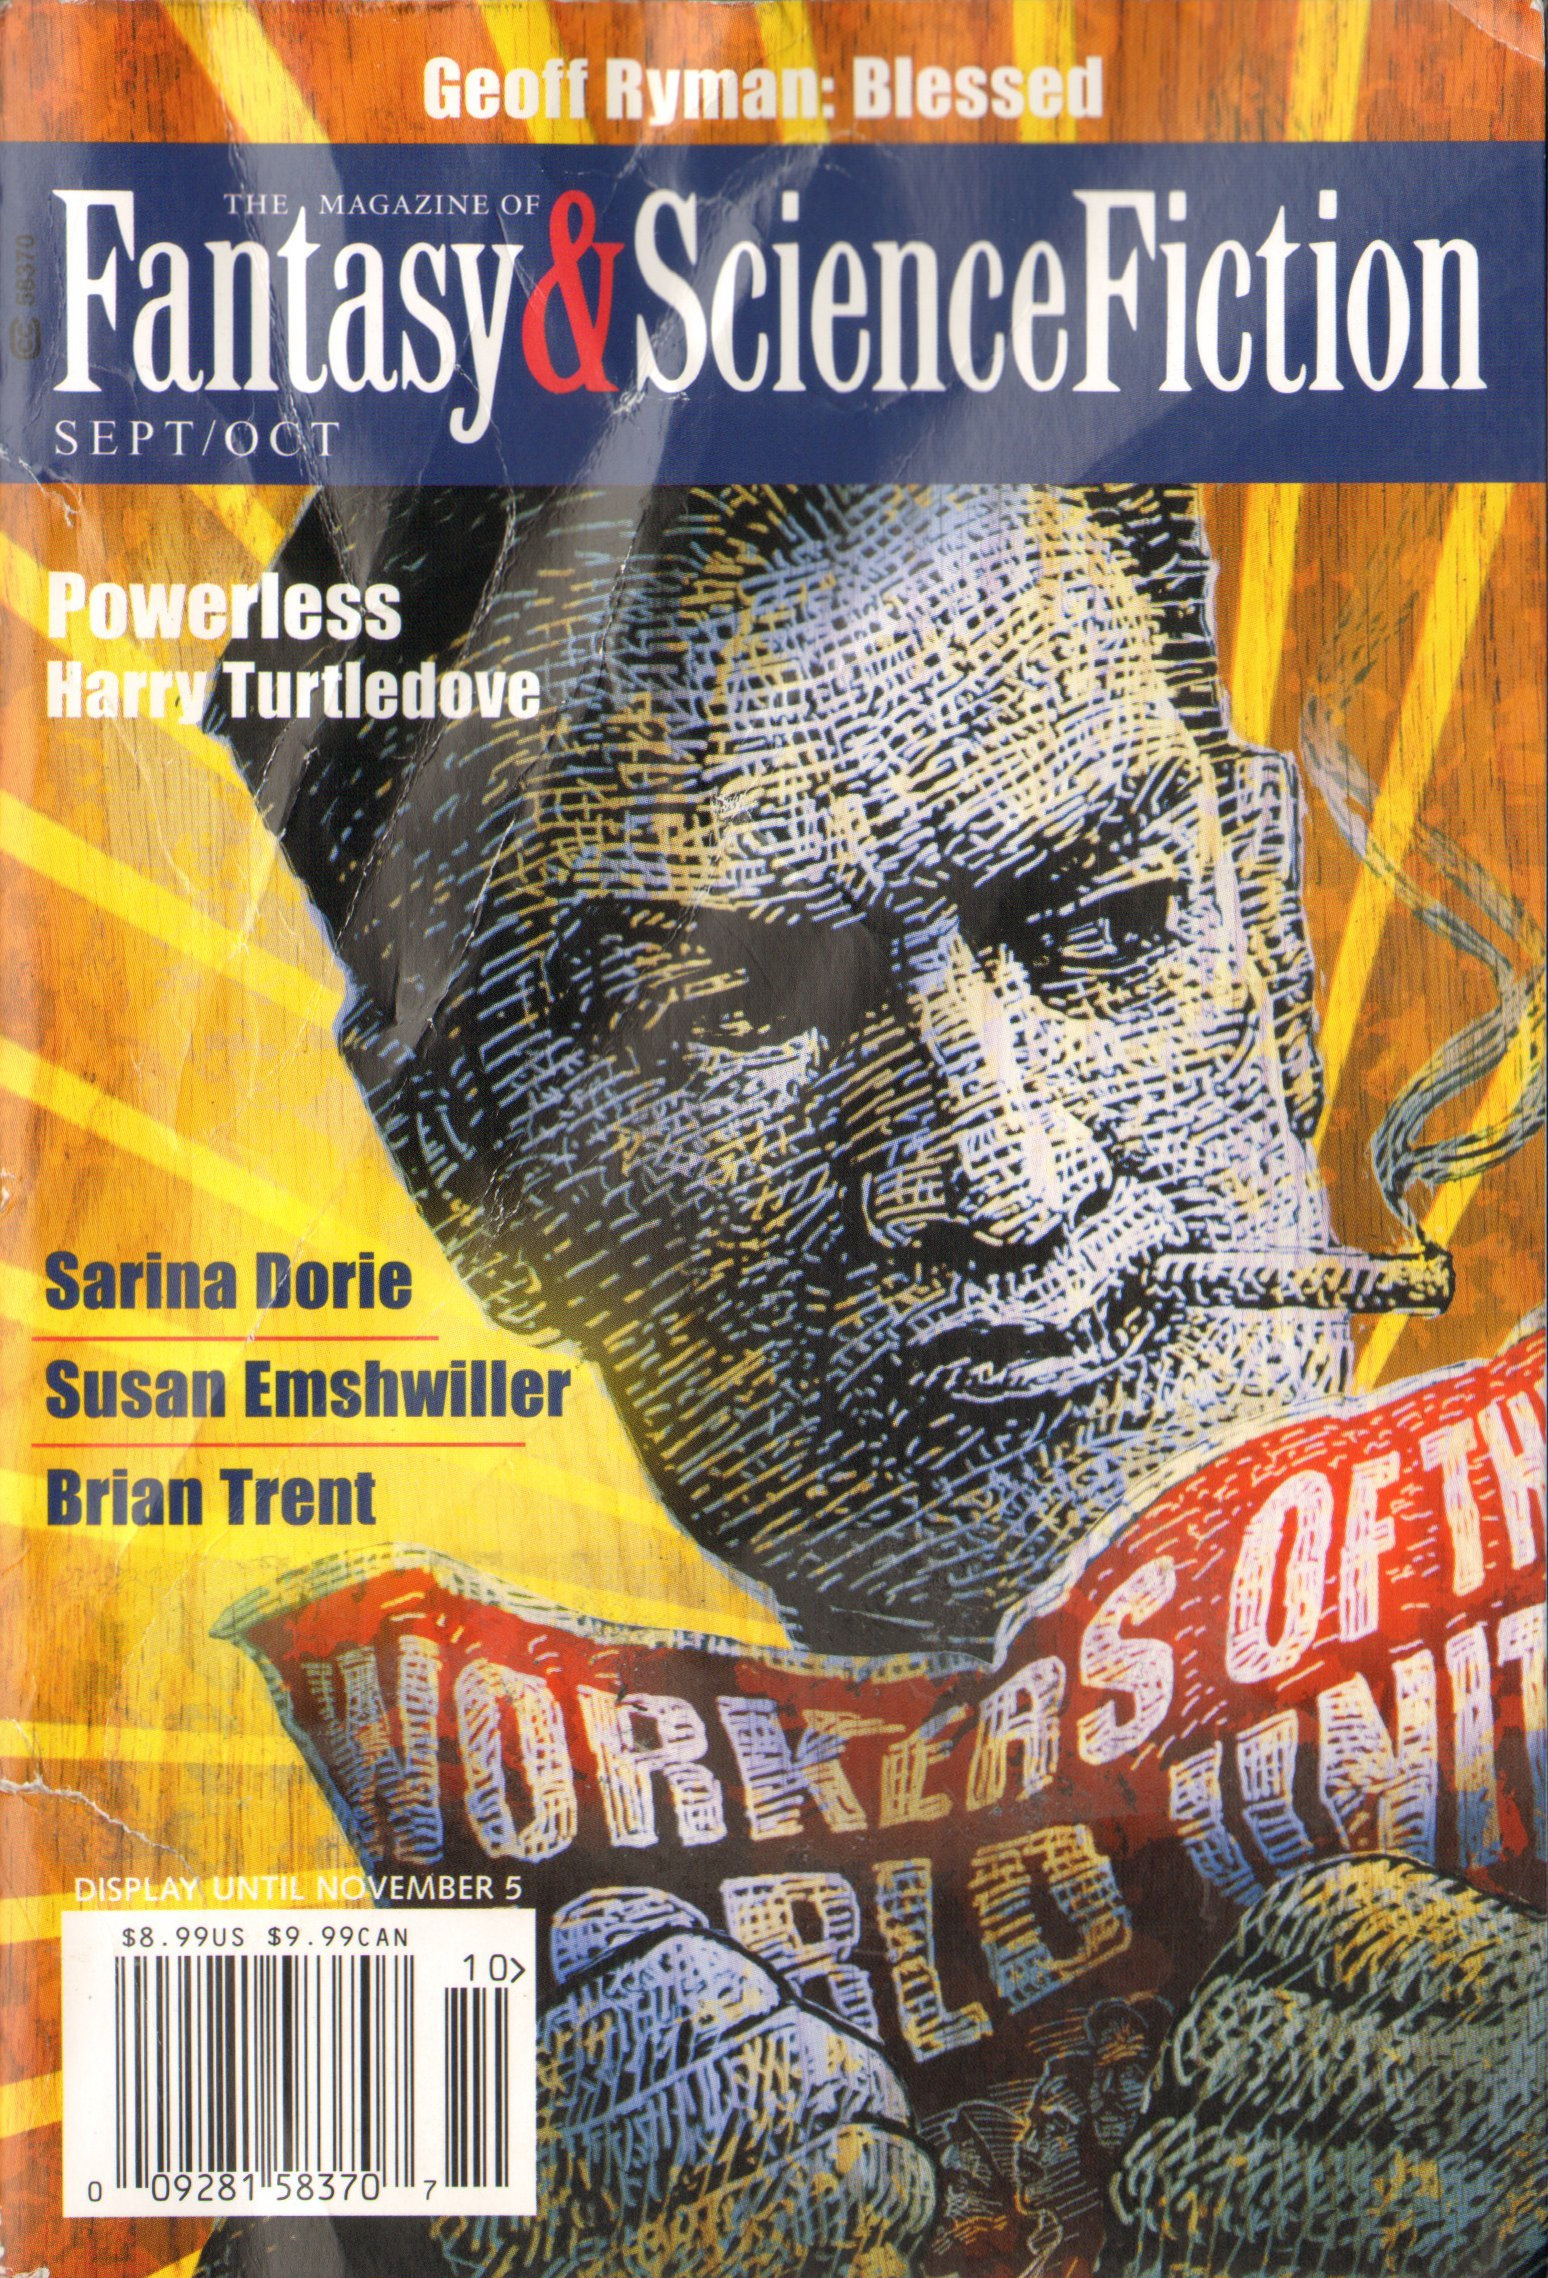 C.C. Finlay: The Magazine of Fantasy & Science Fiction, September/October 2018 (EBook, 2018, Spilogale, Inc..)